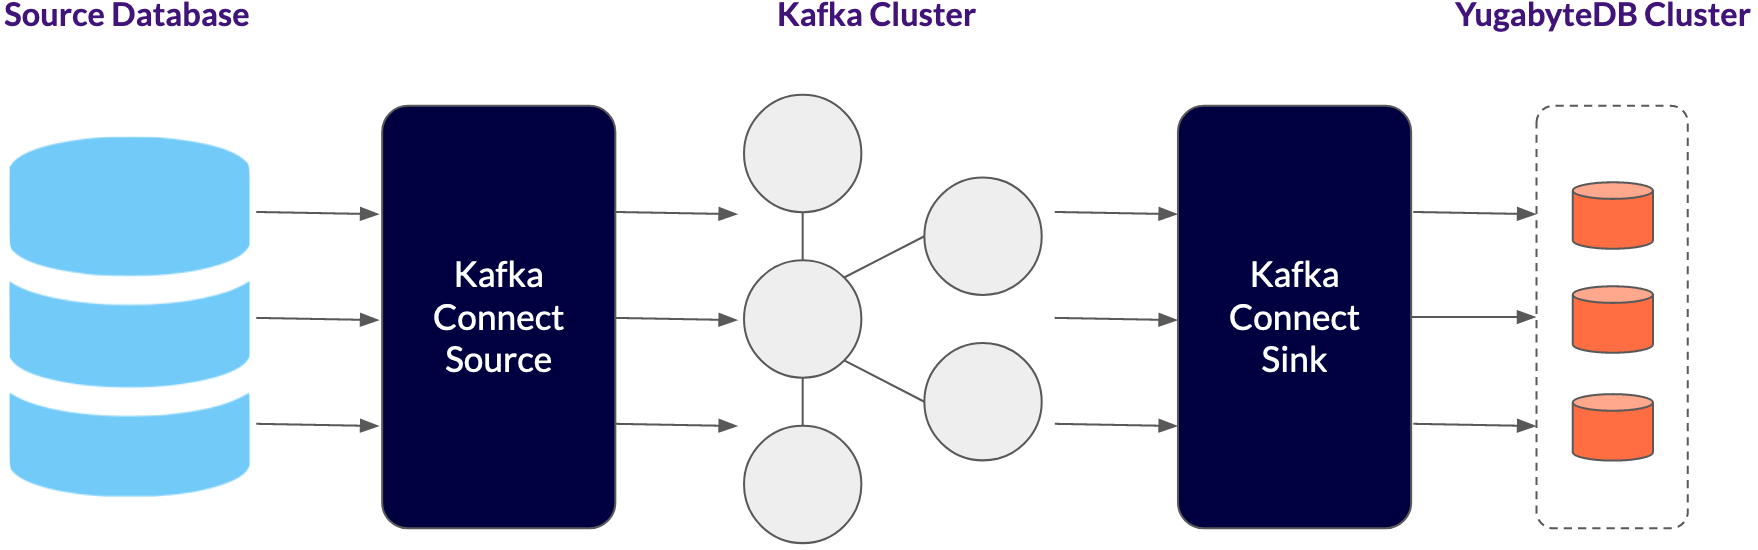 Building Scalable Microservices with YugabyteDB Sink Connector for Apache Kafka